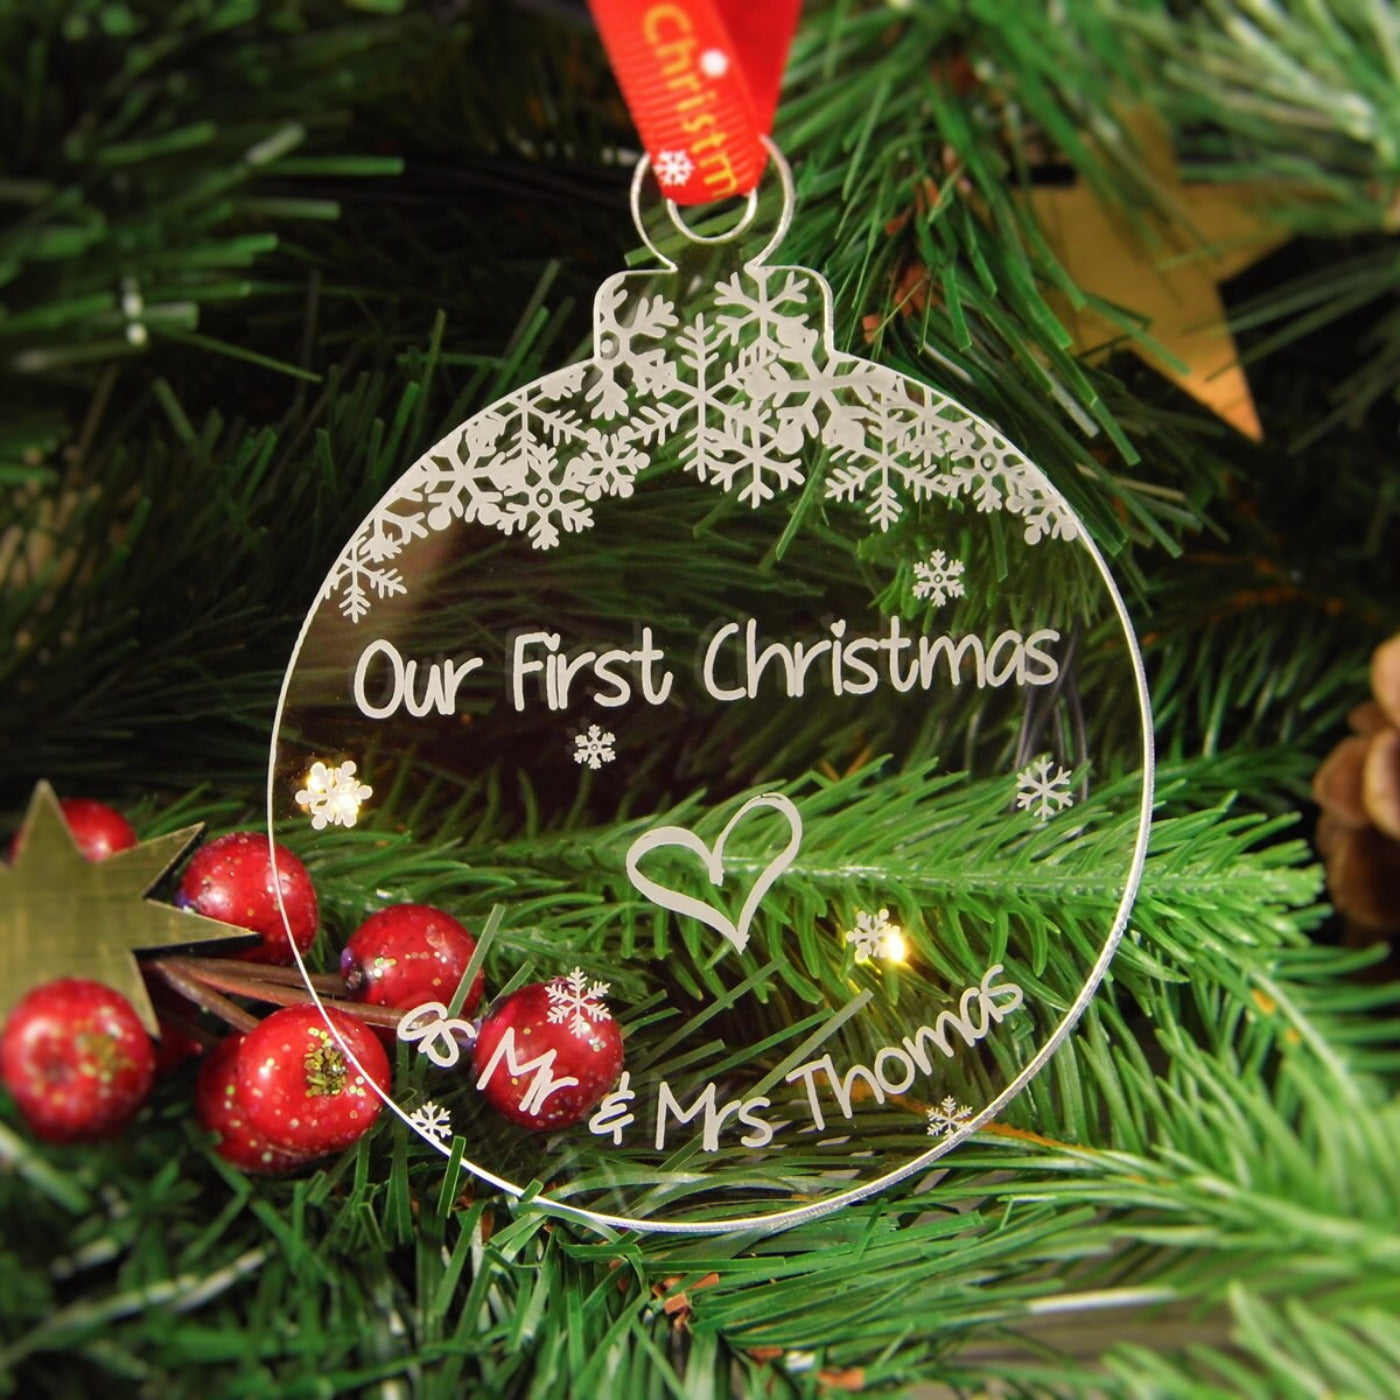 Personalised Christmas Tree Decoration Engraved Bauble Gift - Xmas Wedding, Our First Christmas as Mr & Mrs Bauble - snowflake_mrmrs_bauble